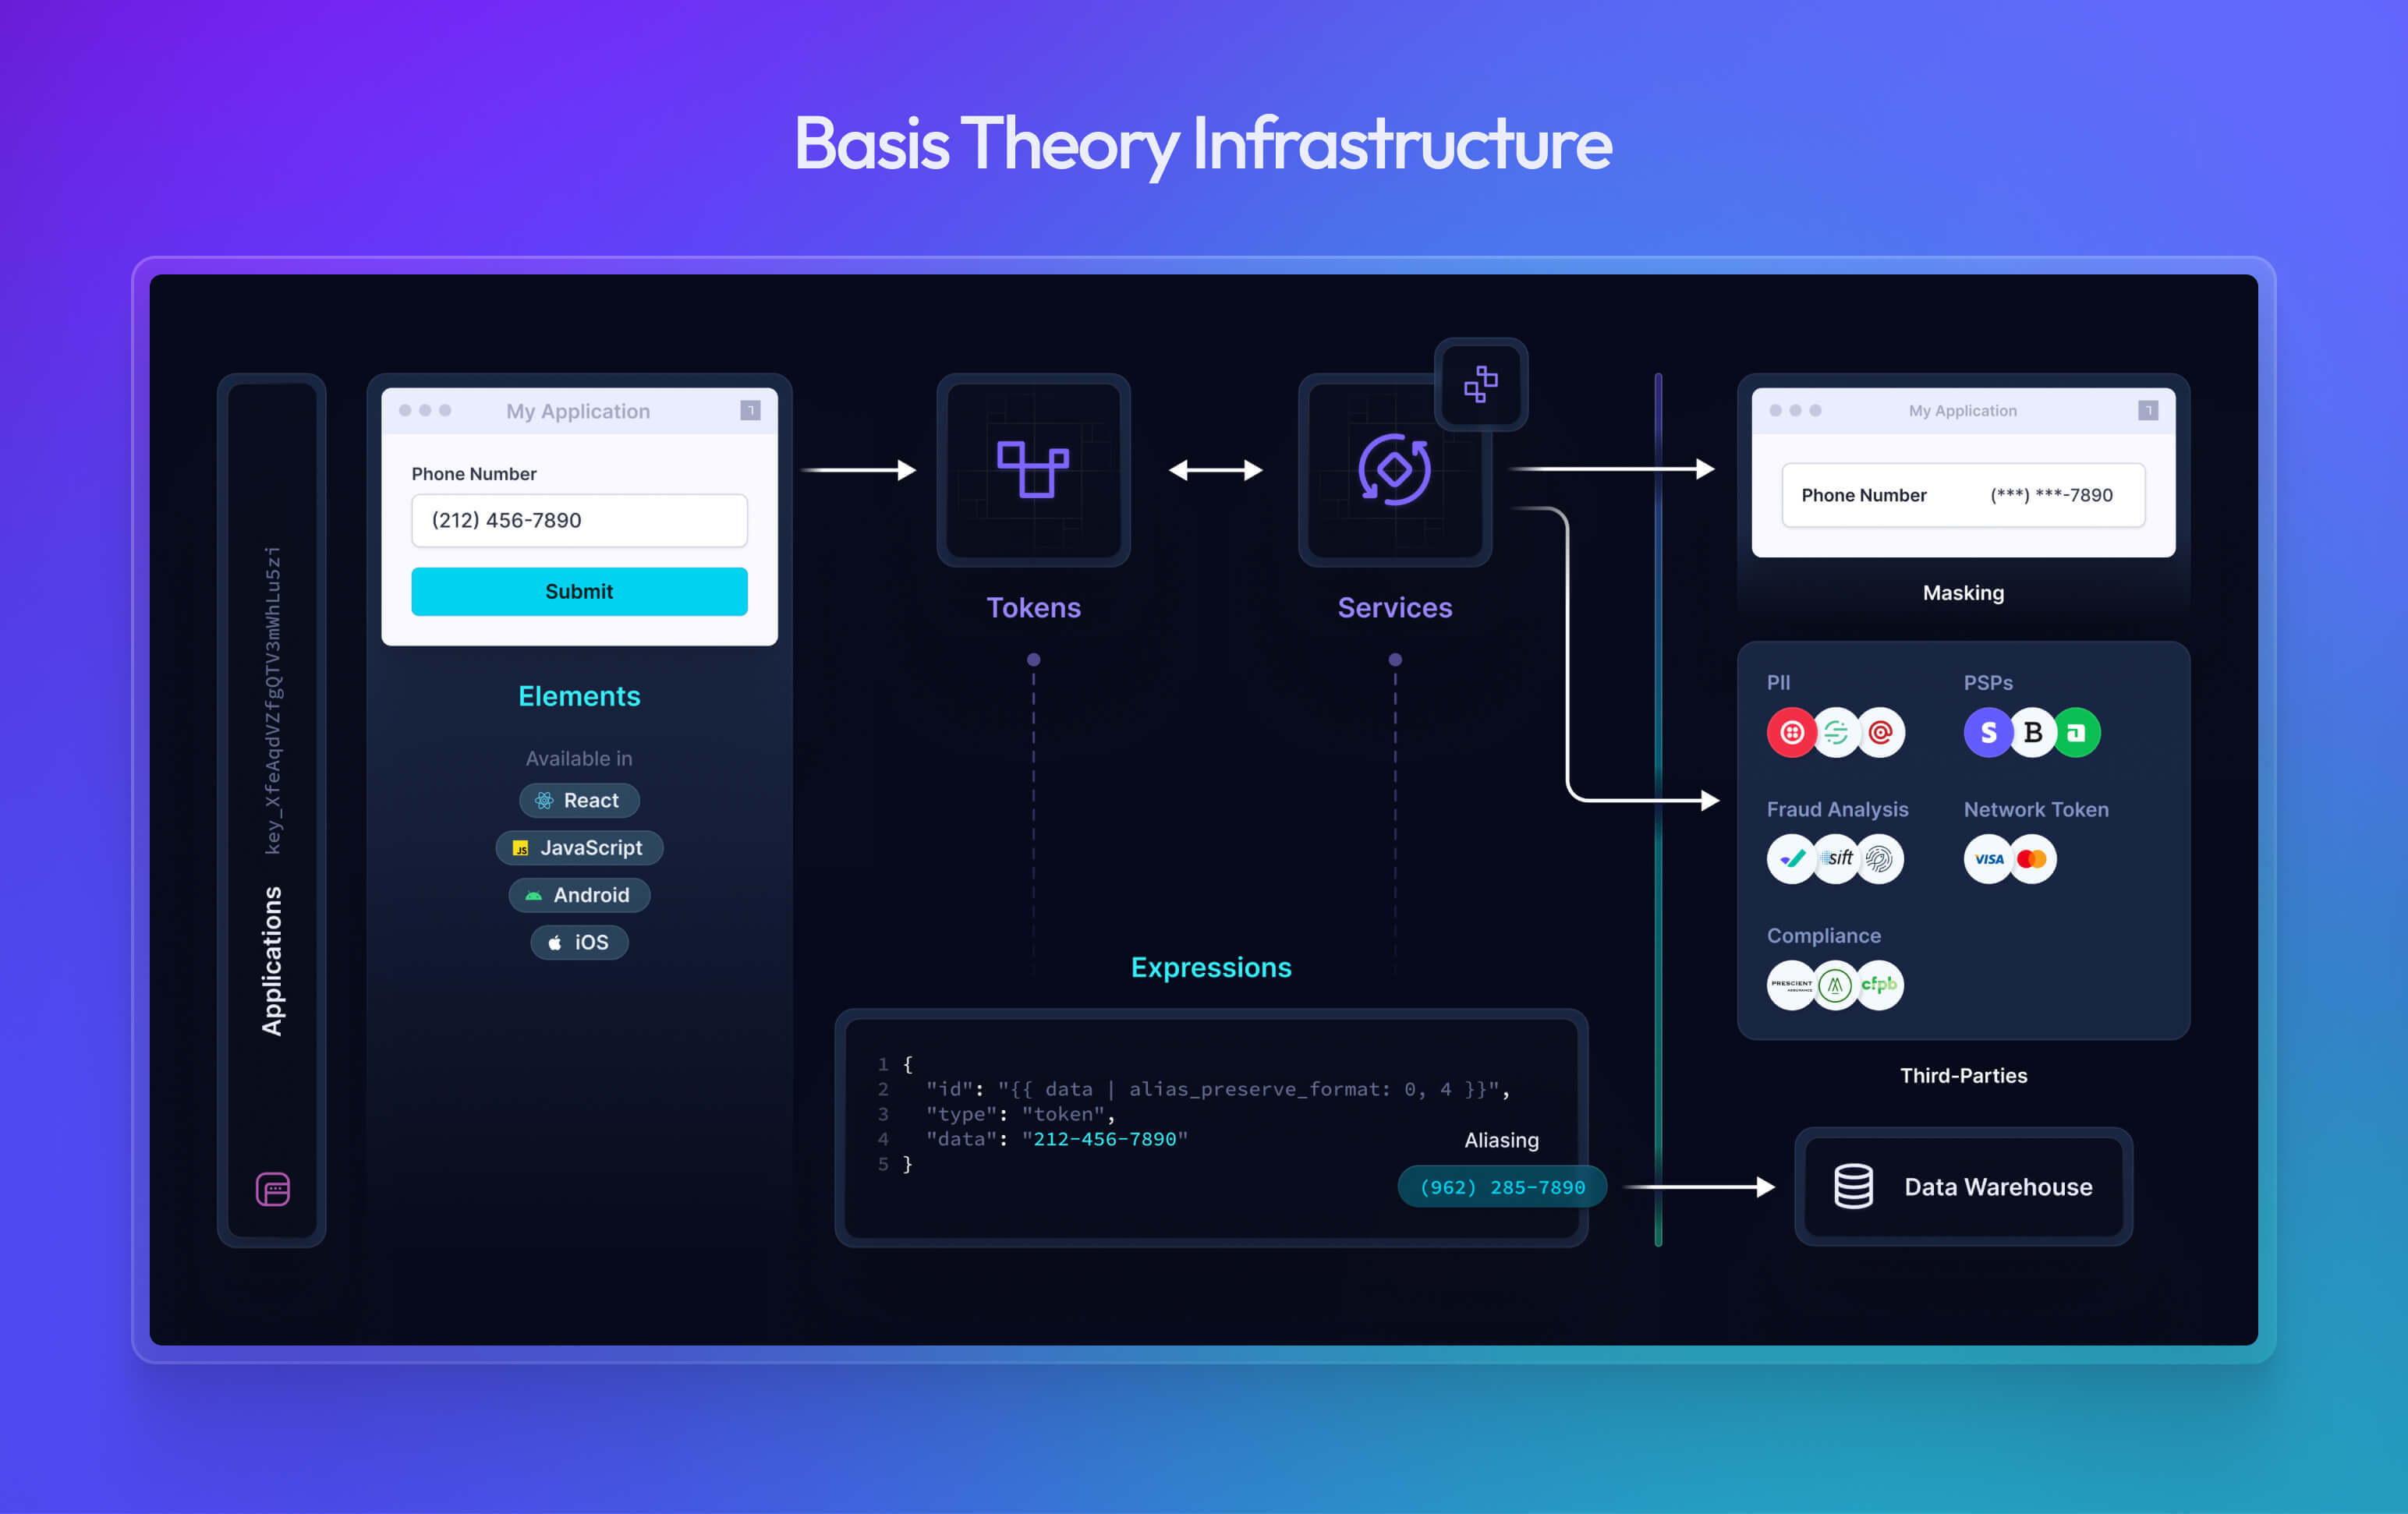 Basis Theory Infrastructure